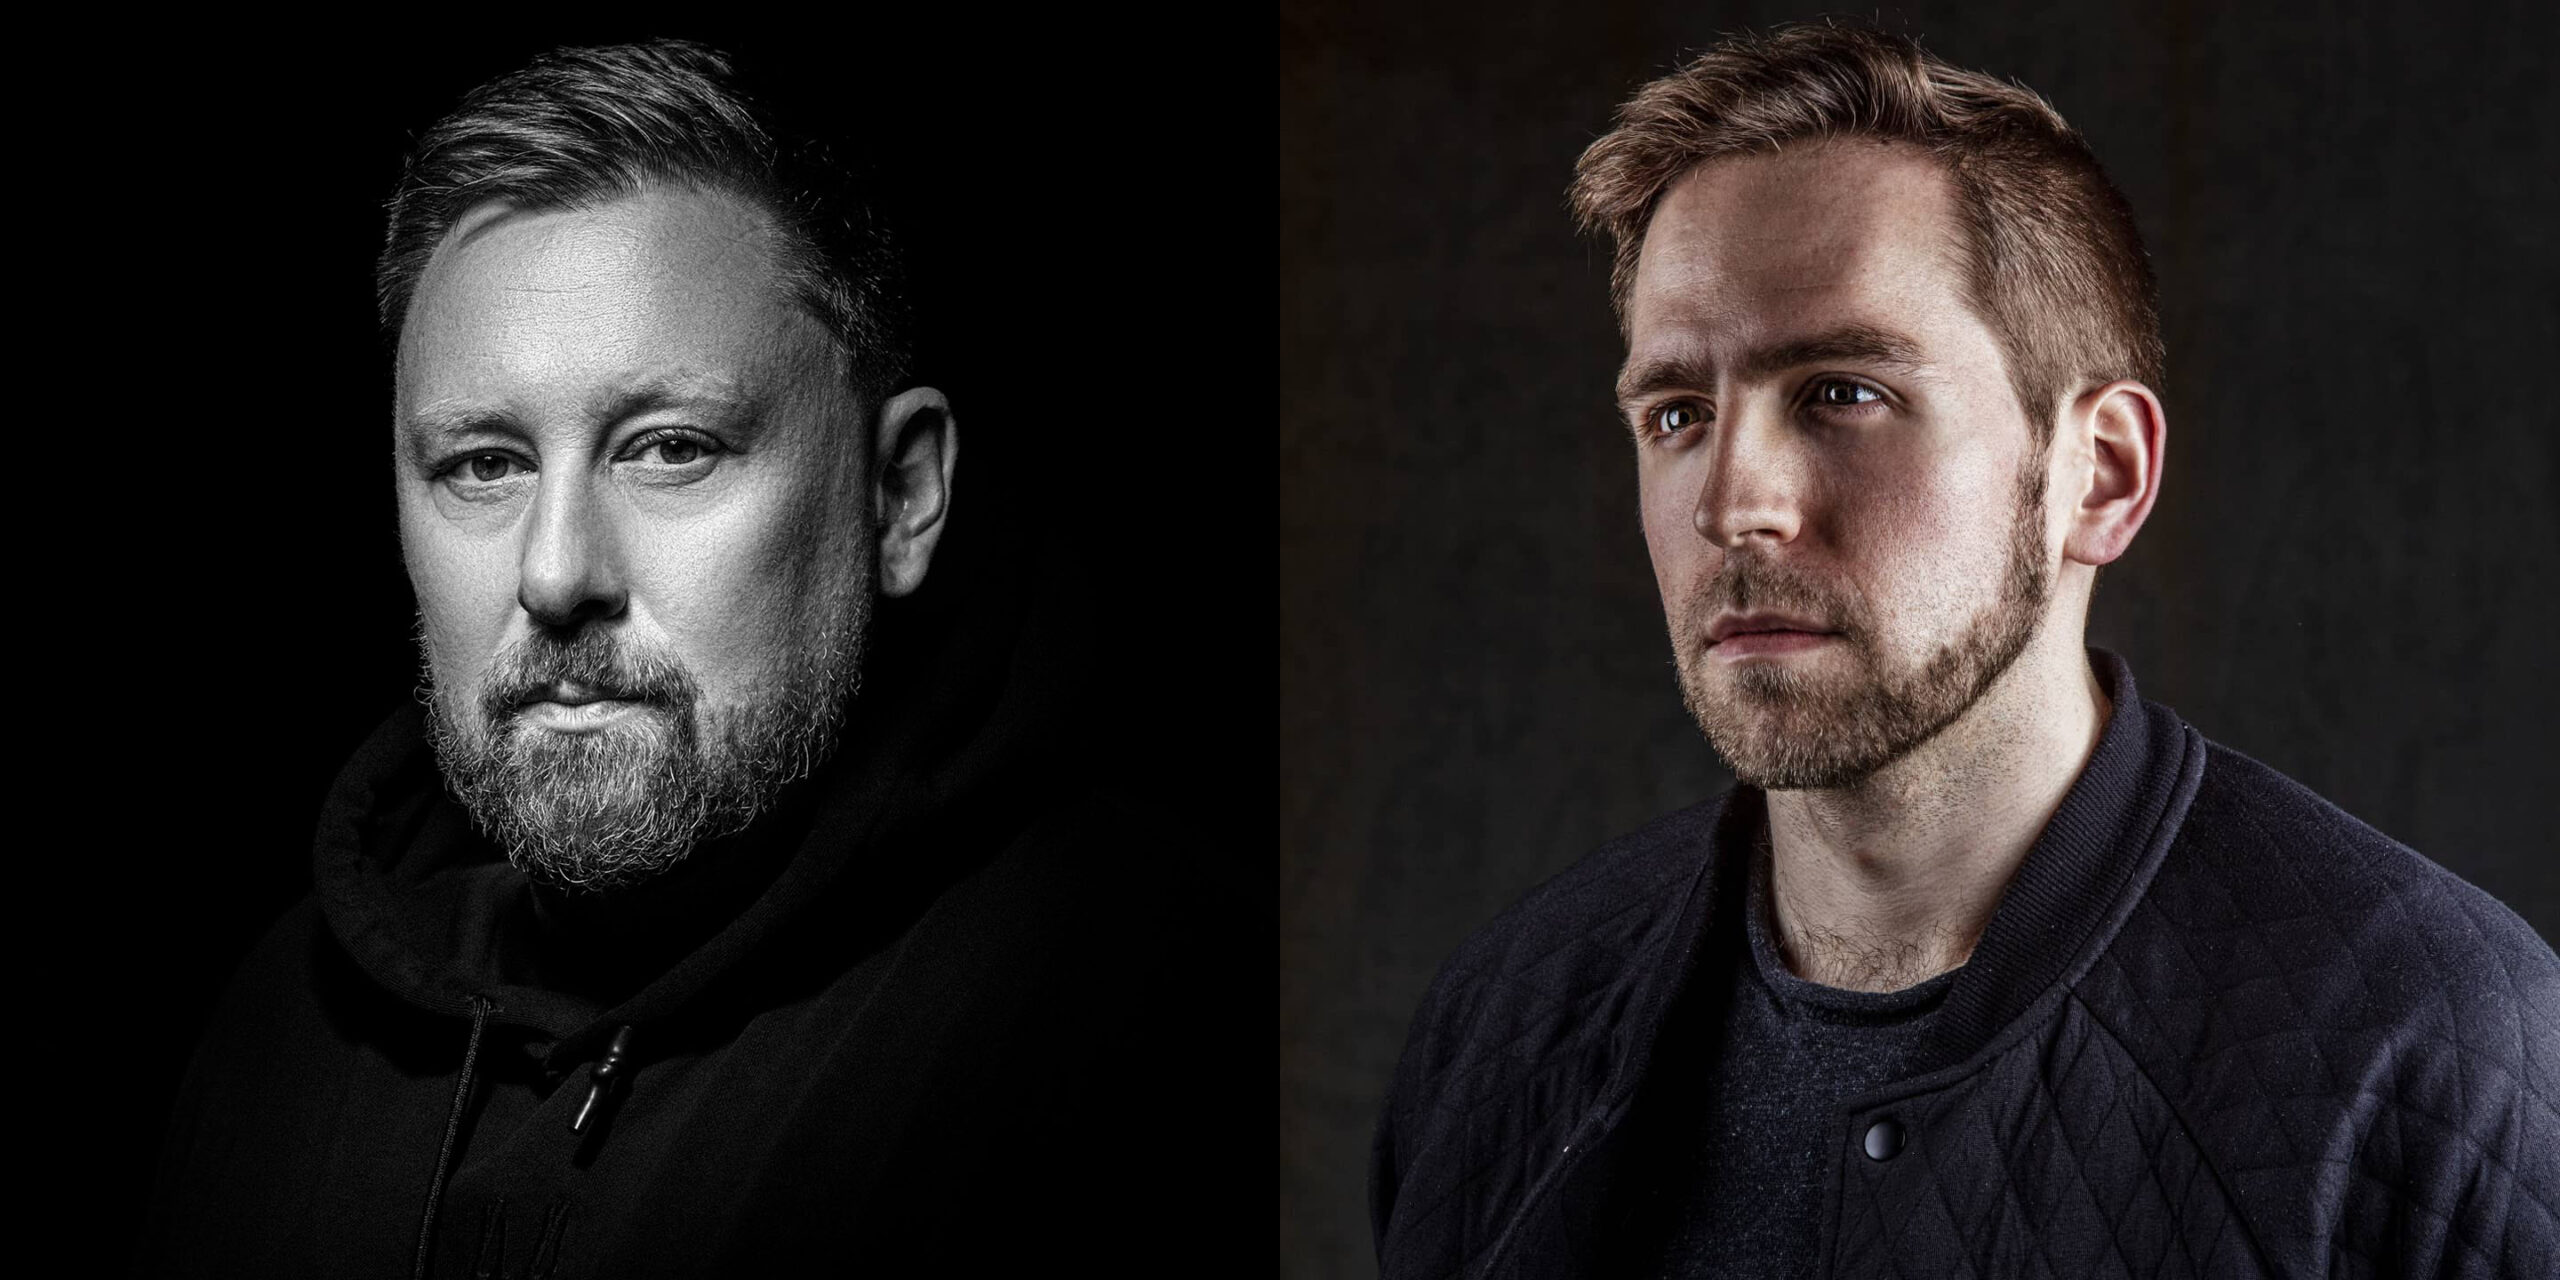 UMEK & Sam WOLFE join forces on new techno single, ‘Aktivate’